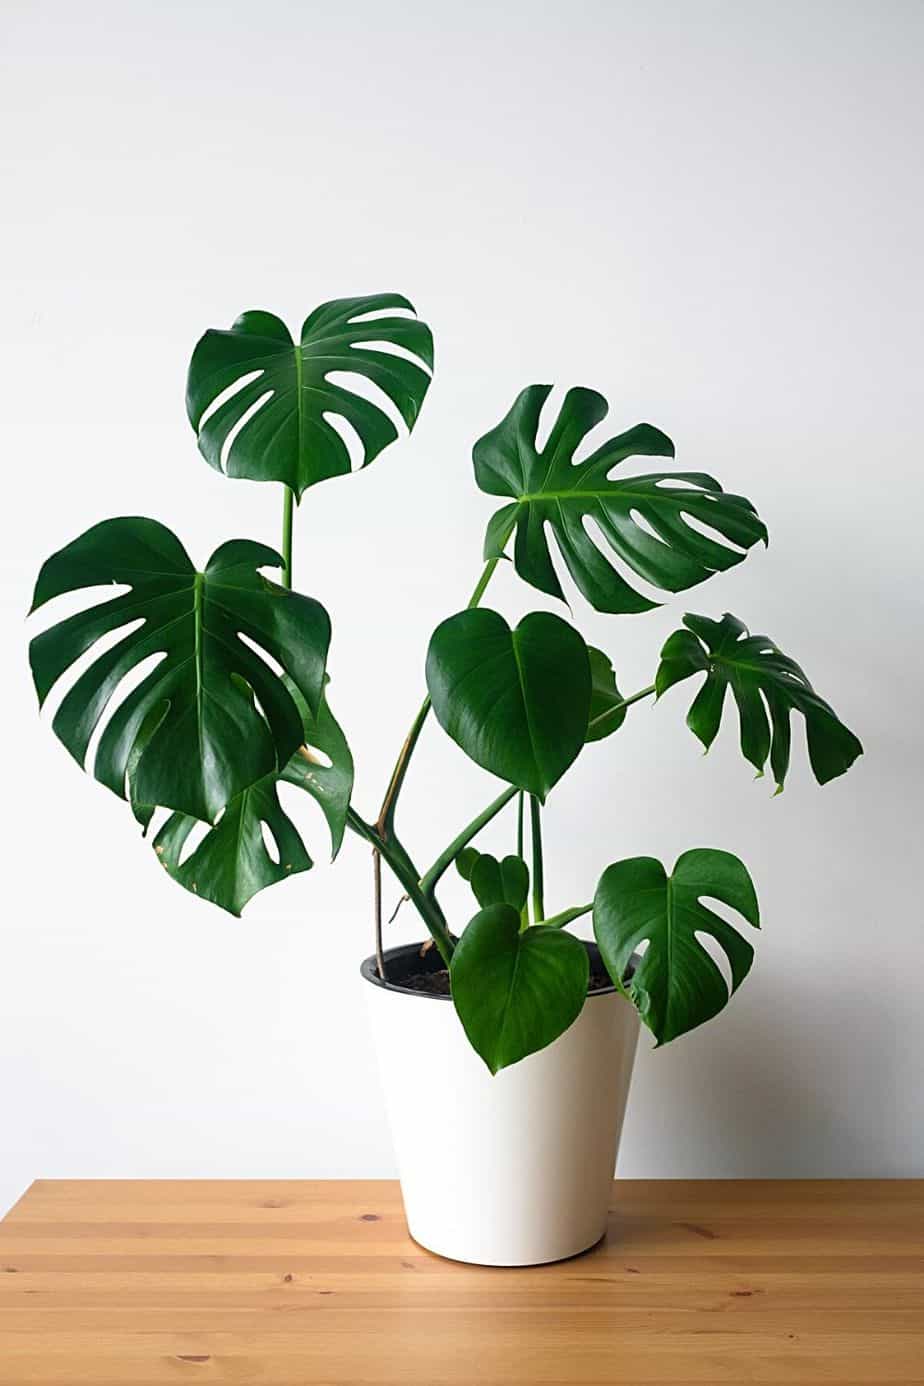 Swiss Cheese Plant has an easy-to-care-for schedule that helps when you place it by your northwest-facing window